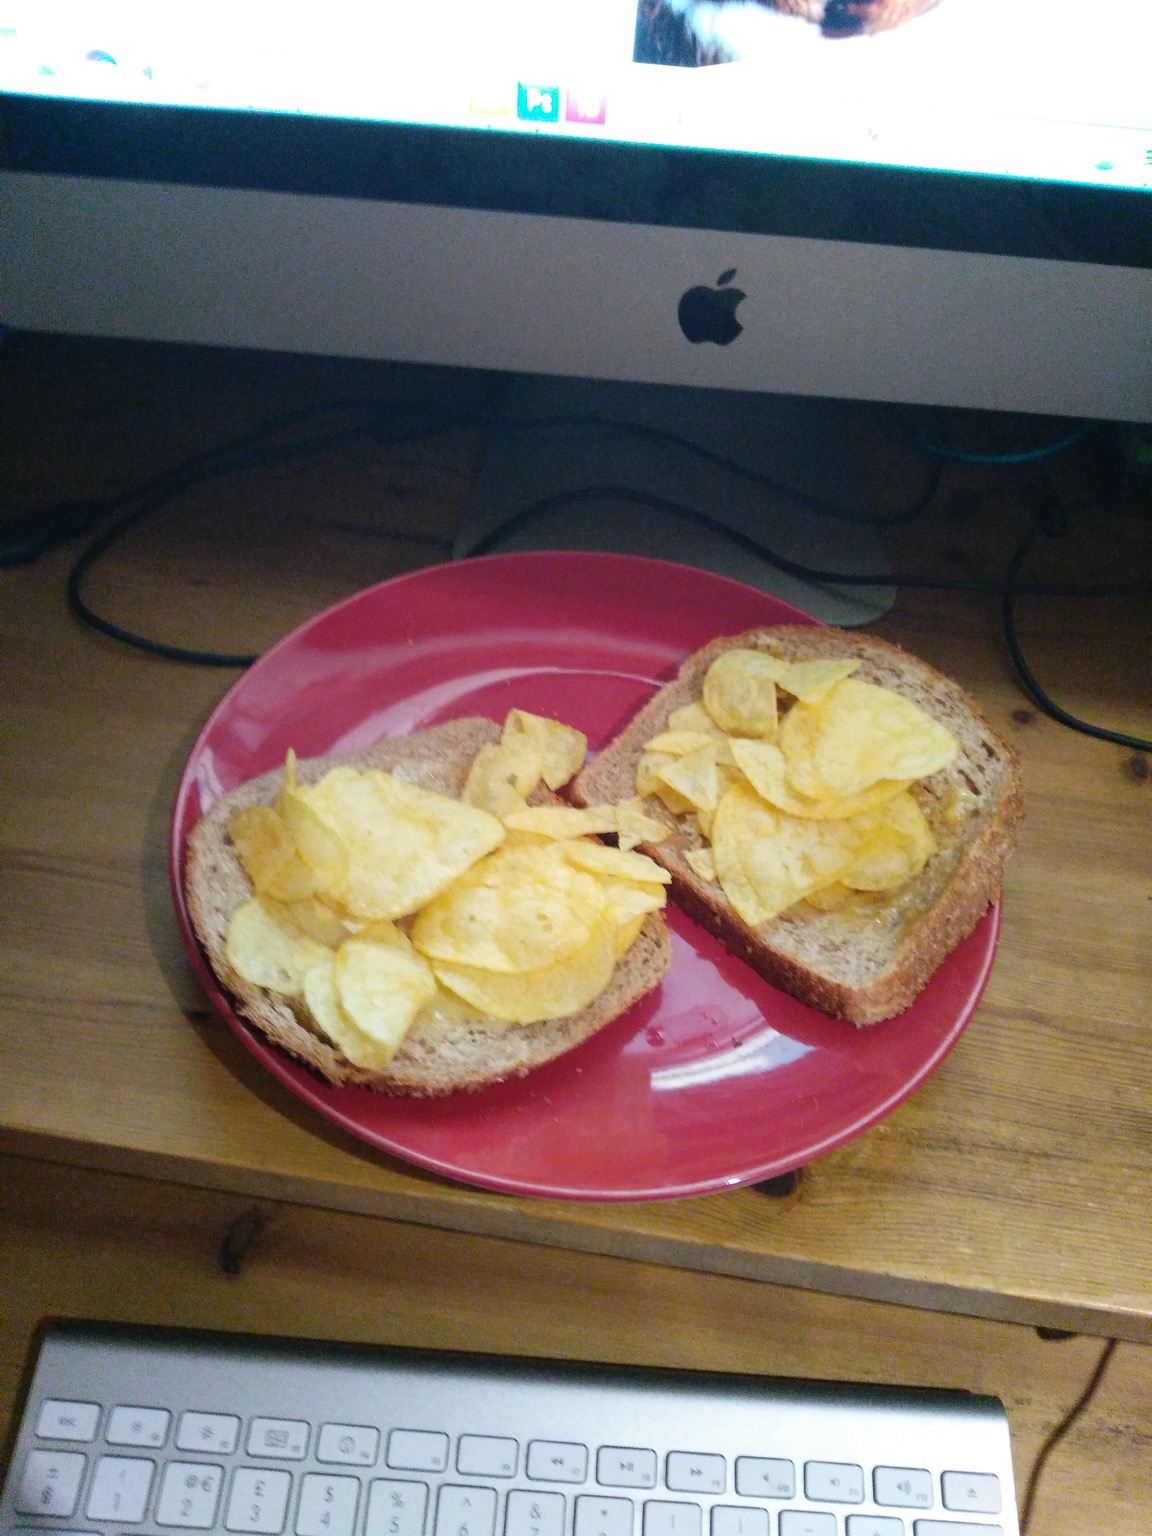 Potato crisps on brown bread in front of an iMac